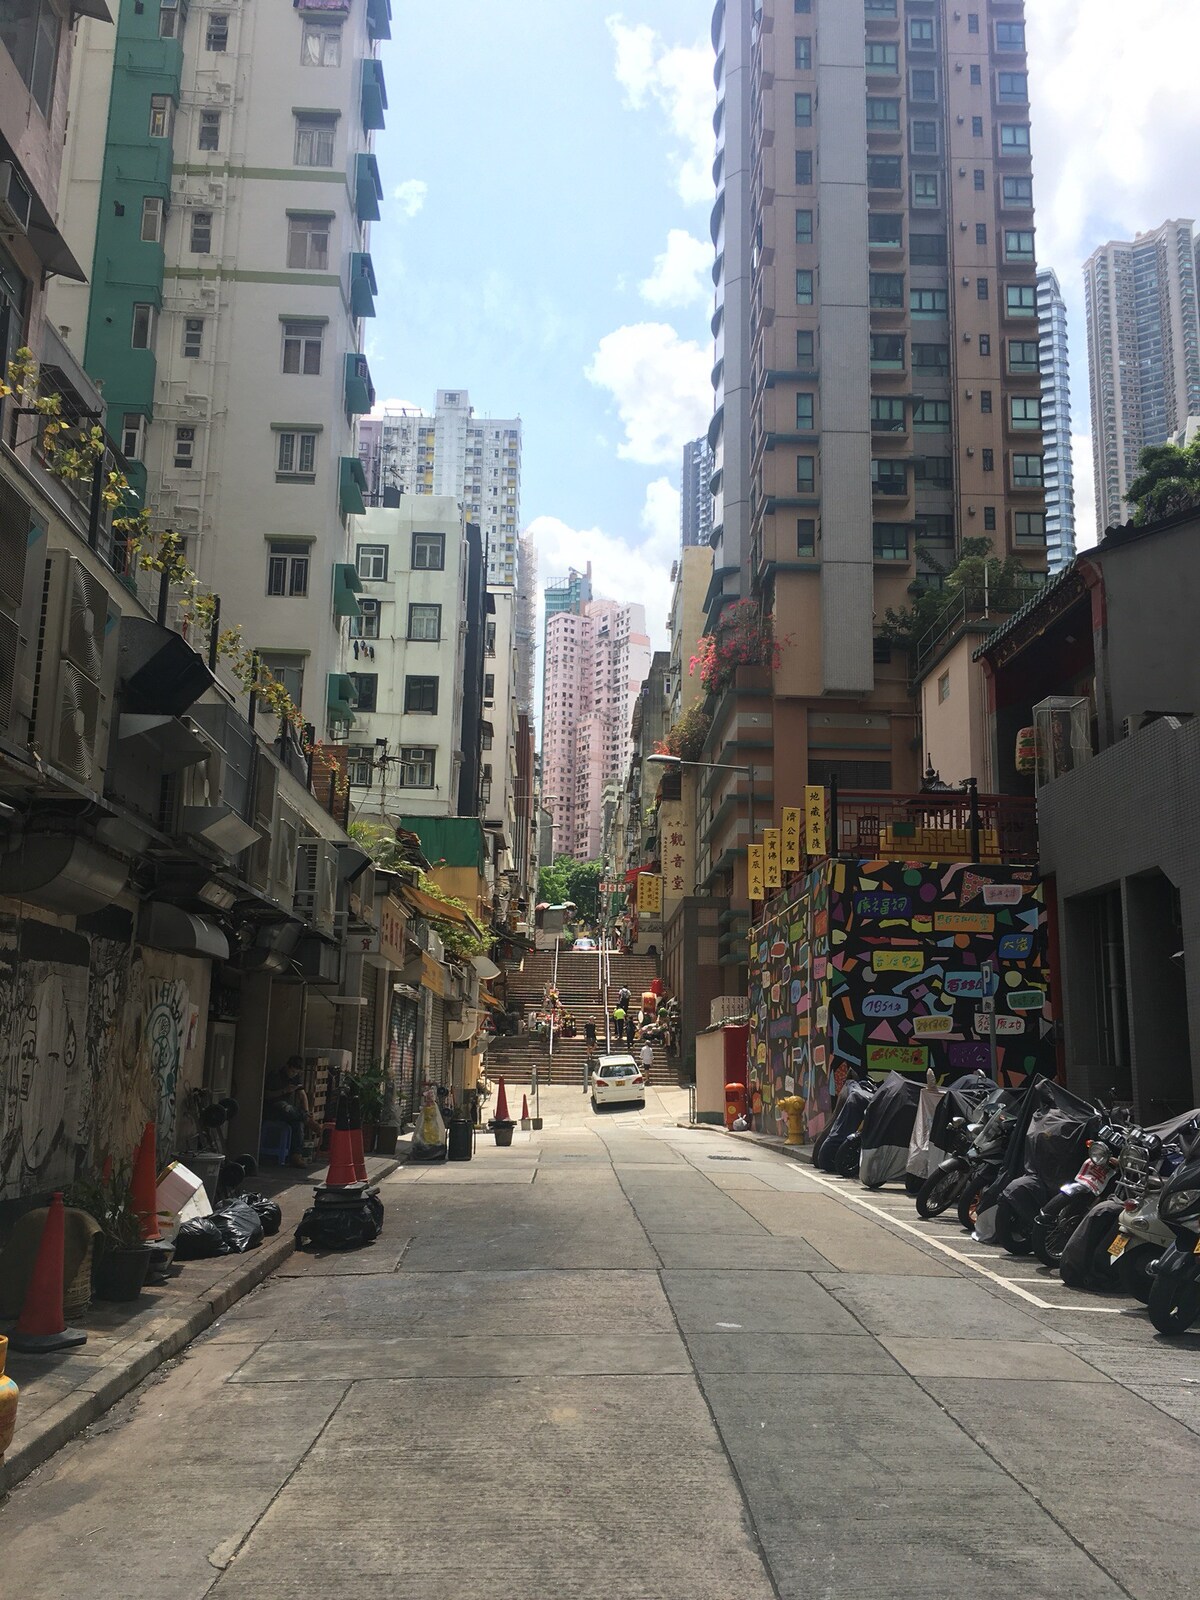 Spacious, stylishly decorated, in the heart of HK